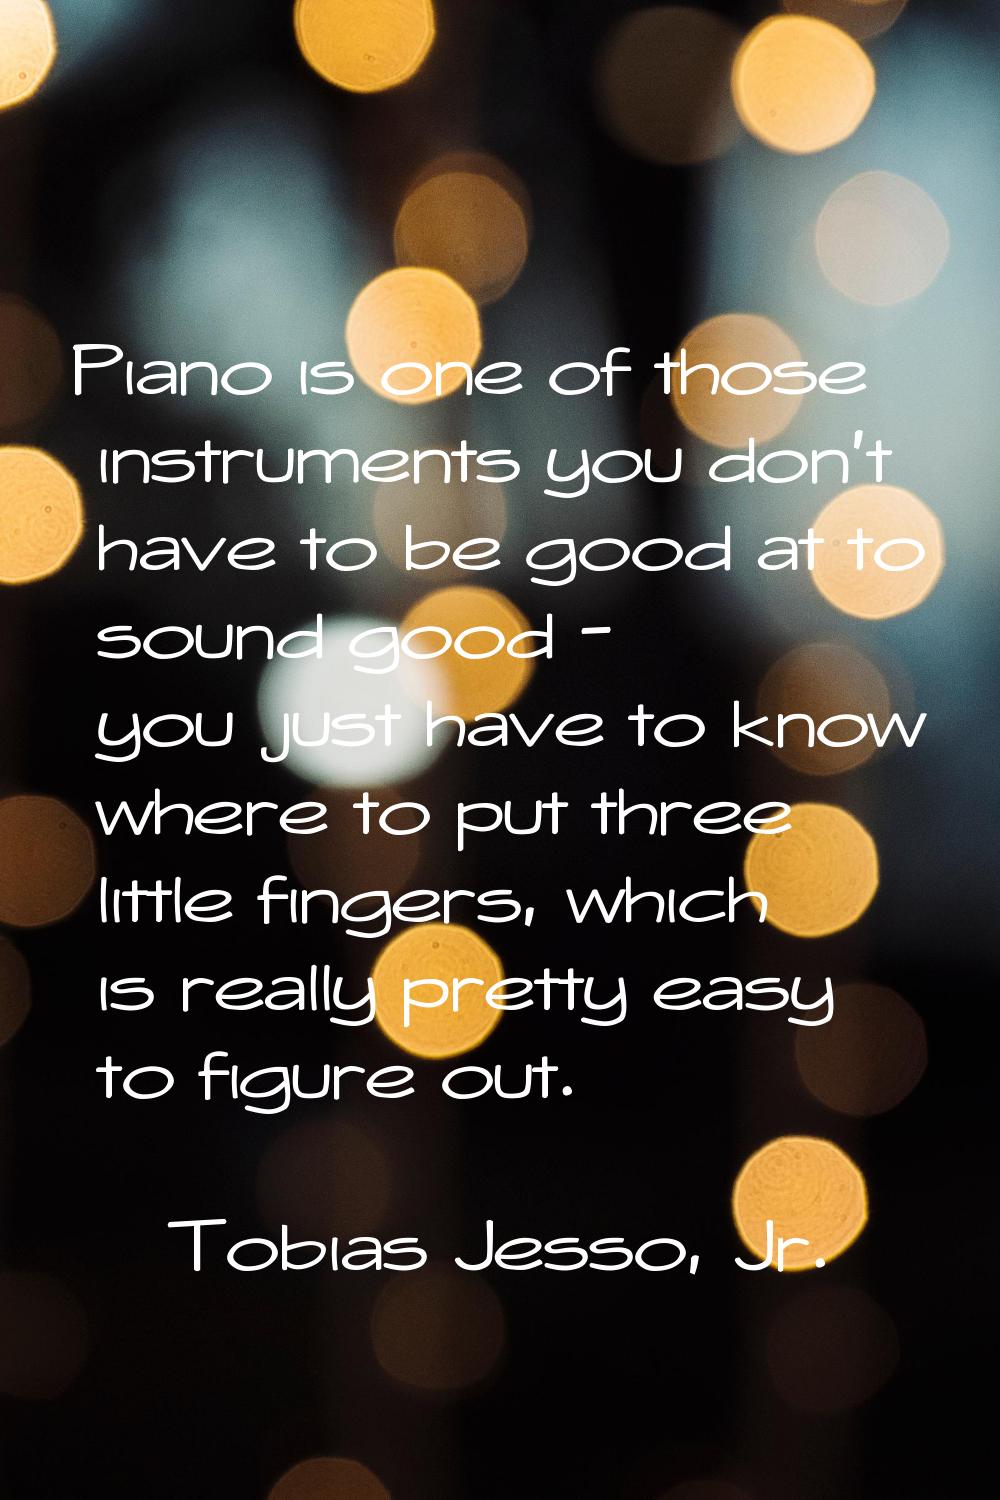 Piano is one of those instruments you don't have to be good at to sound good - you just have to kno